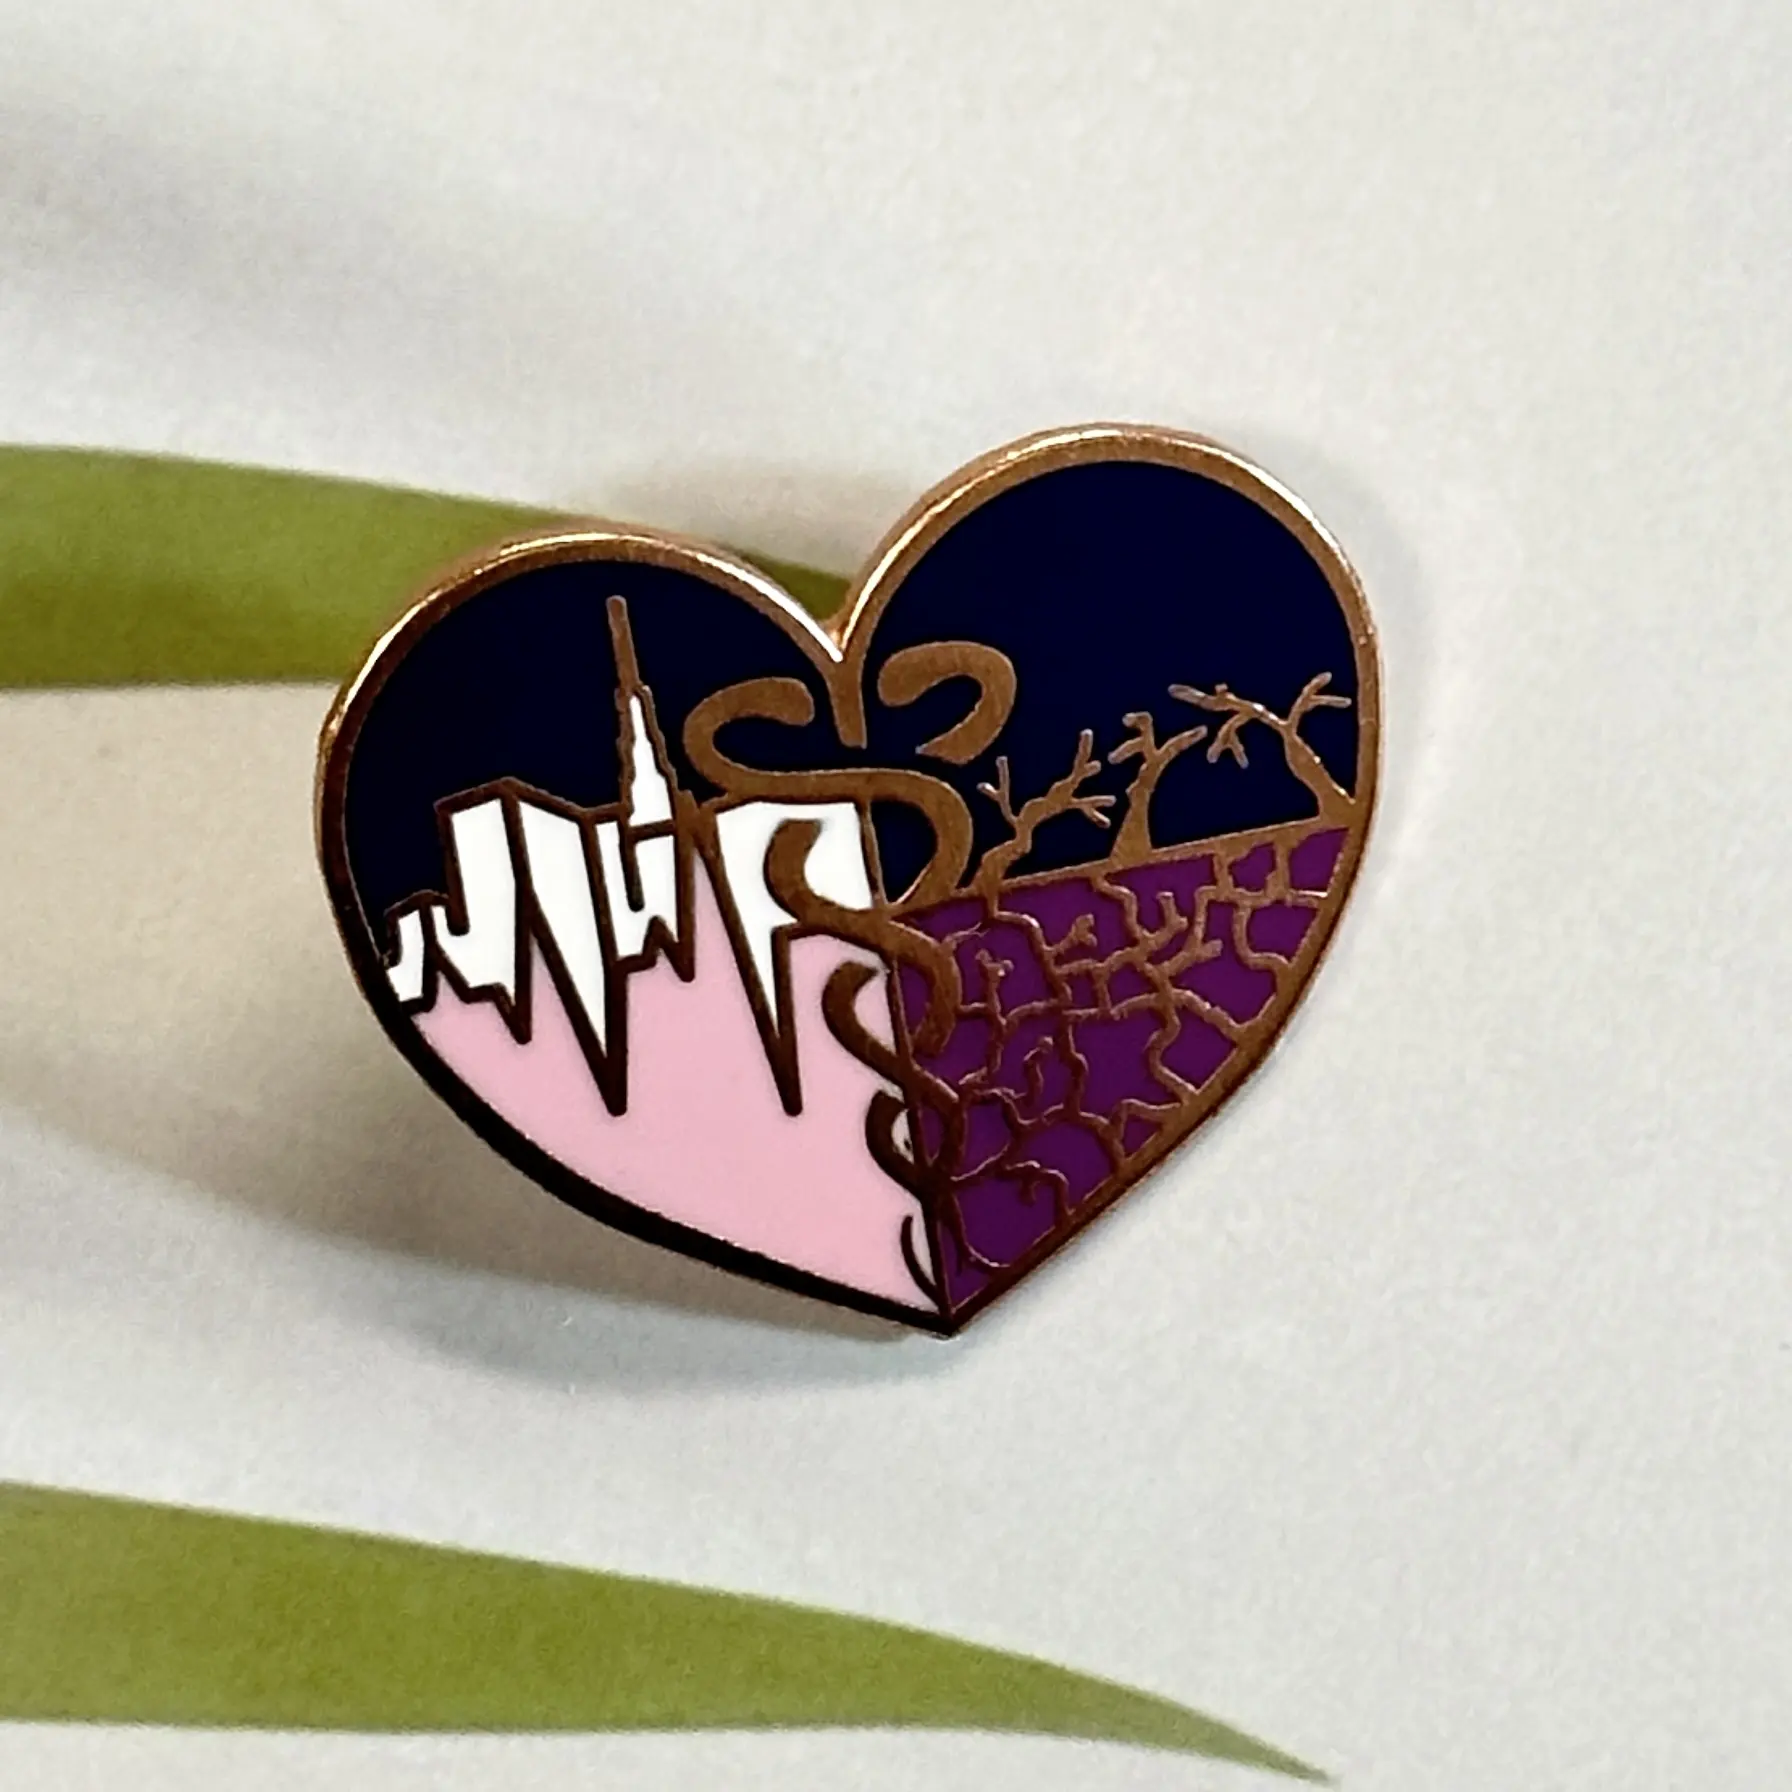 New style custom heart shape brooch soft and hard enamel pin for decoration